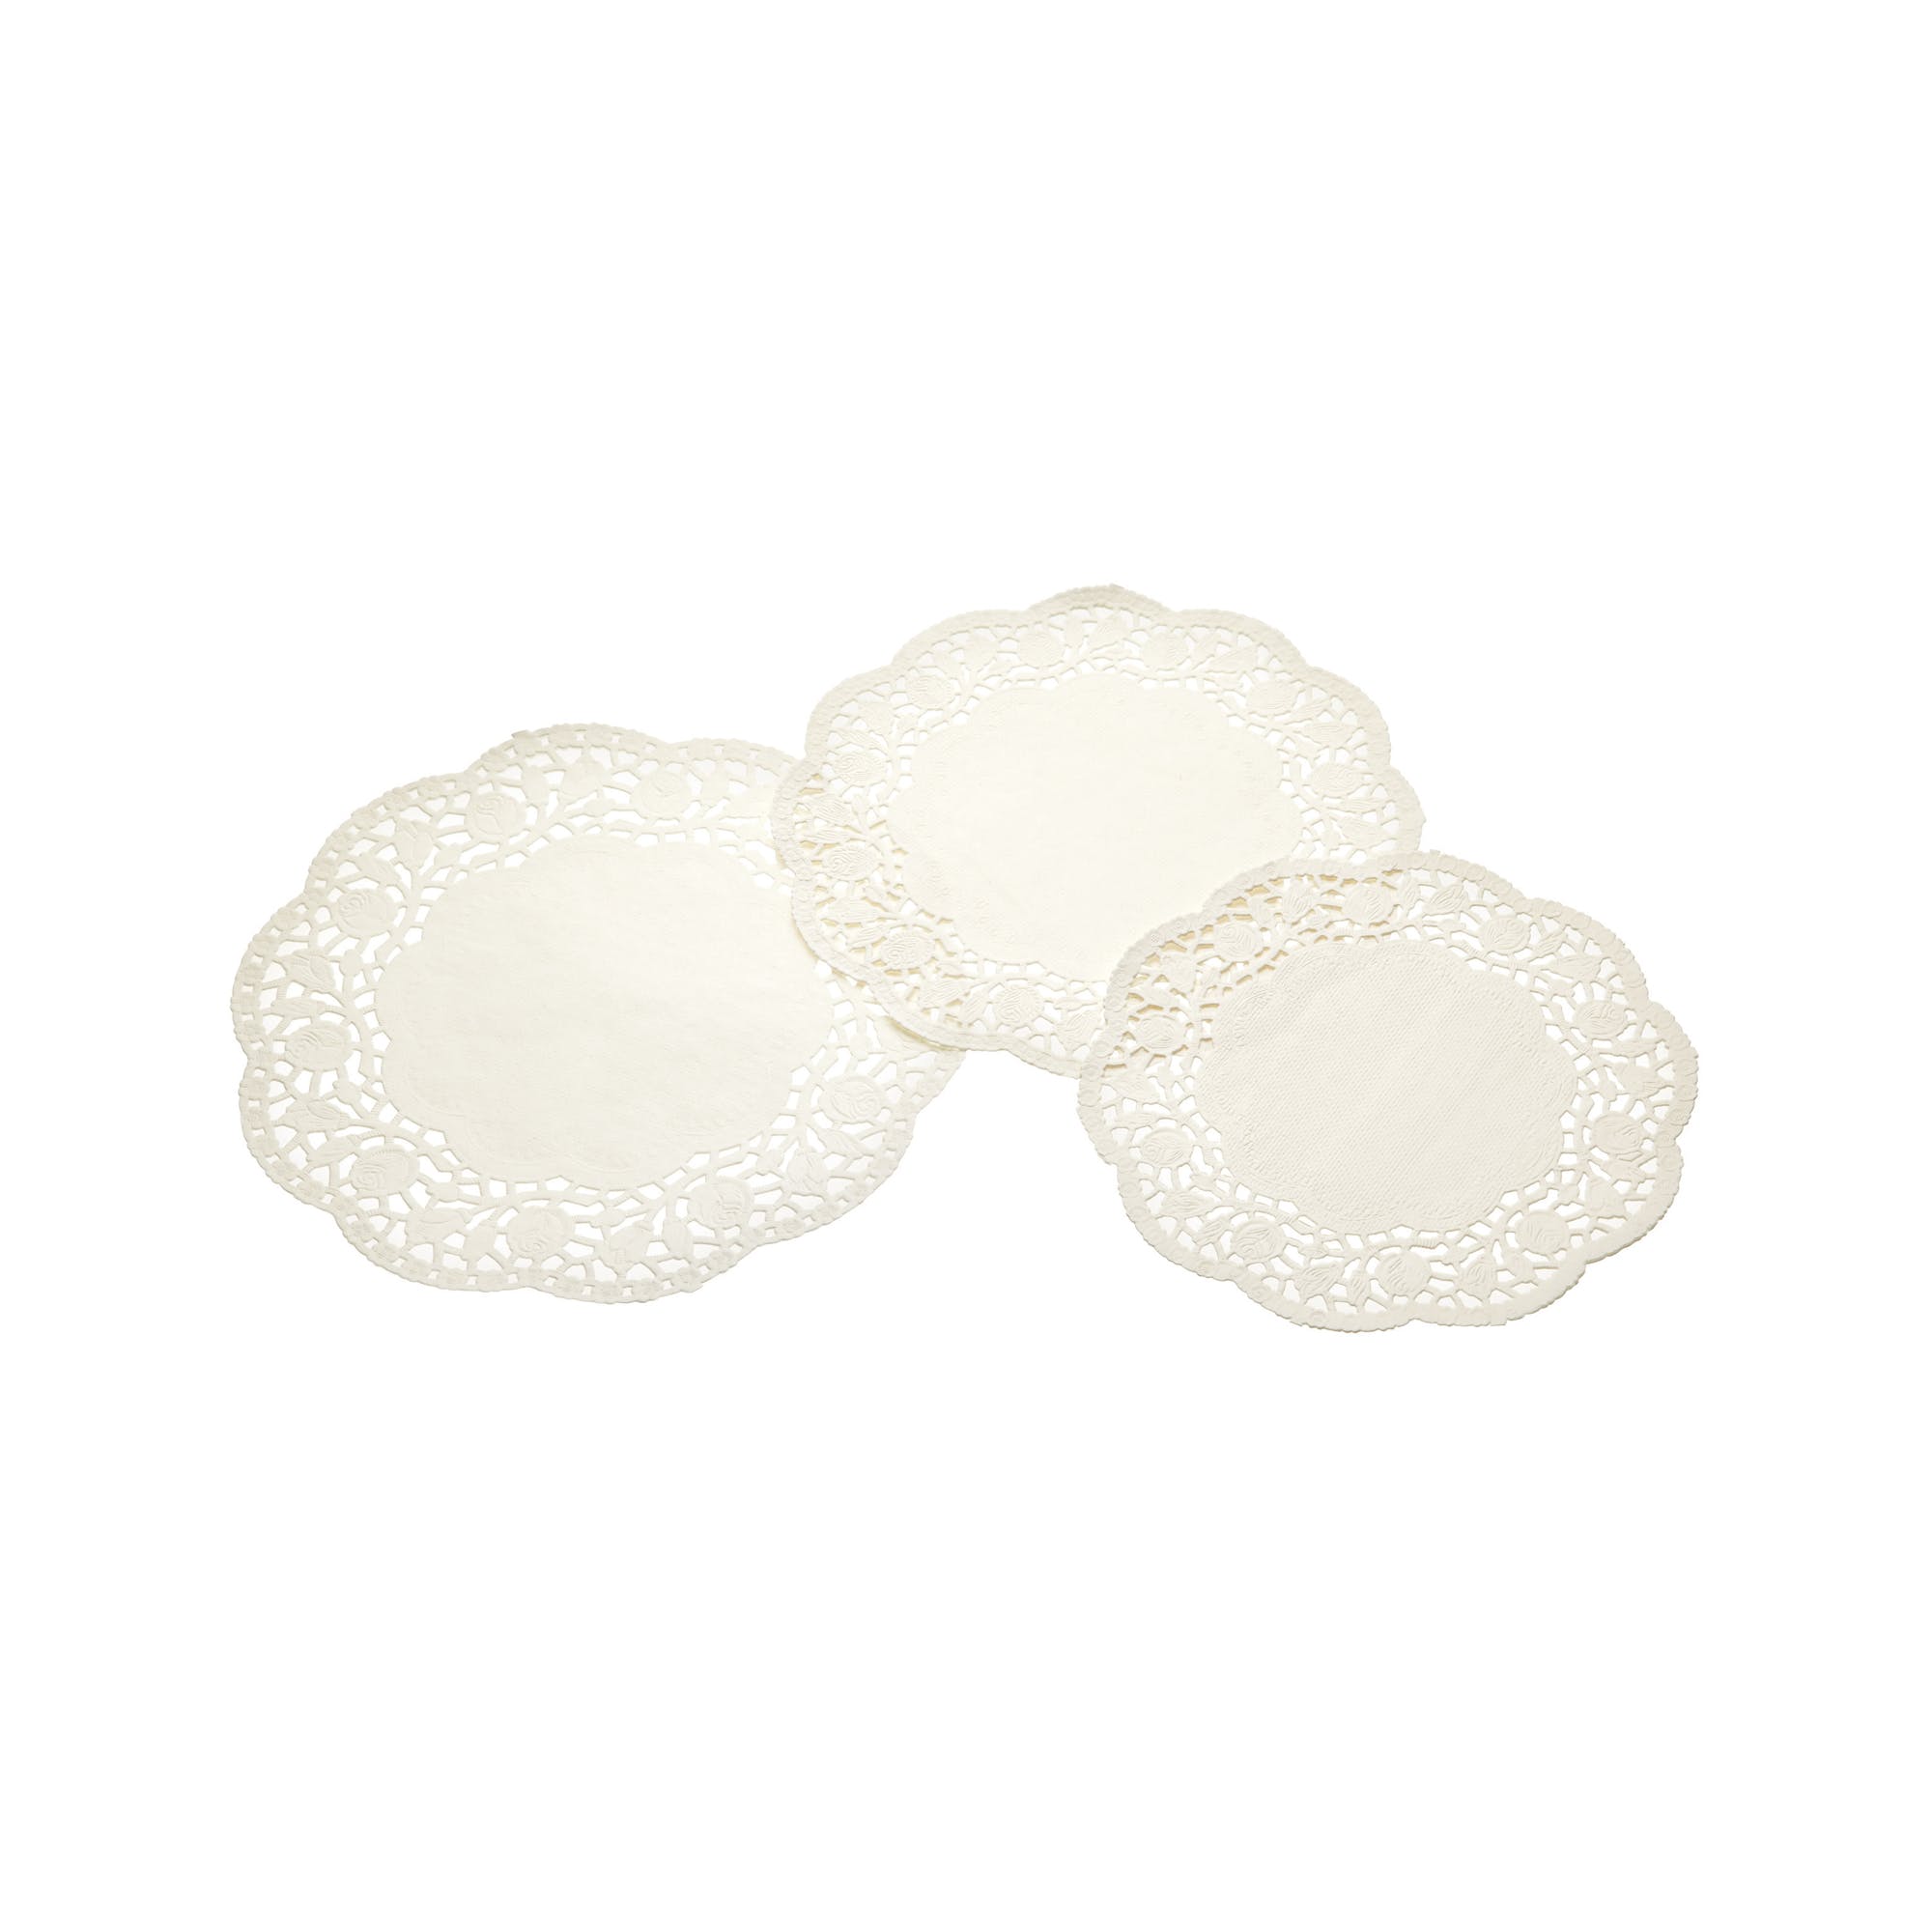 Sweetly Does It Pack of 24 Paper Doilies - The Cooks Cupboard Ltd